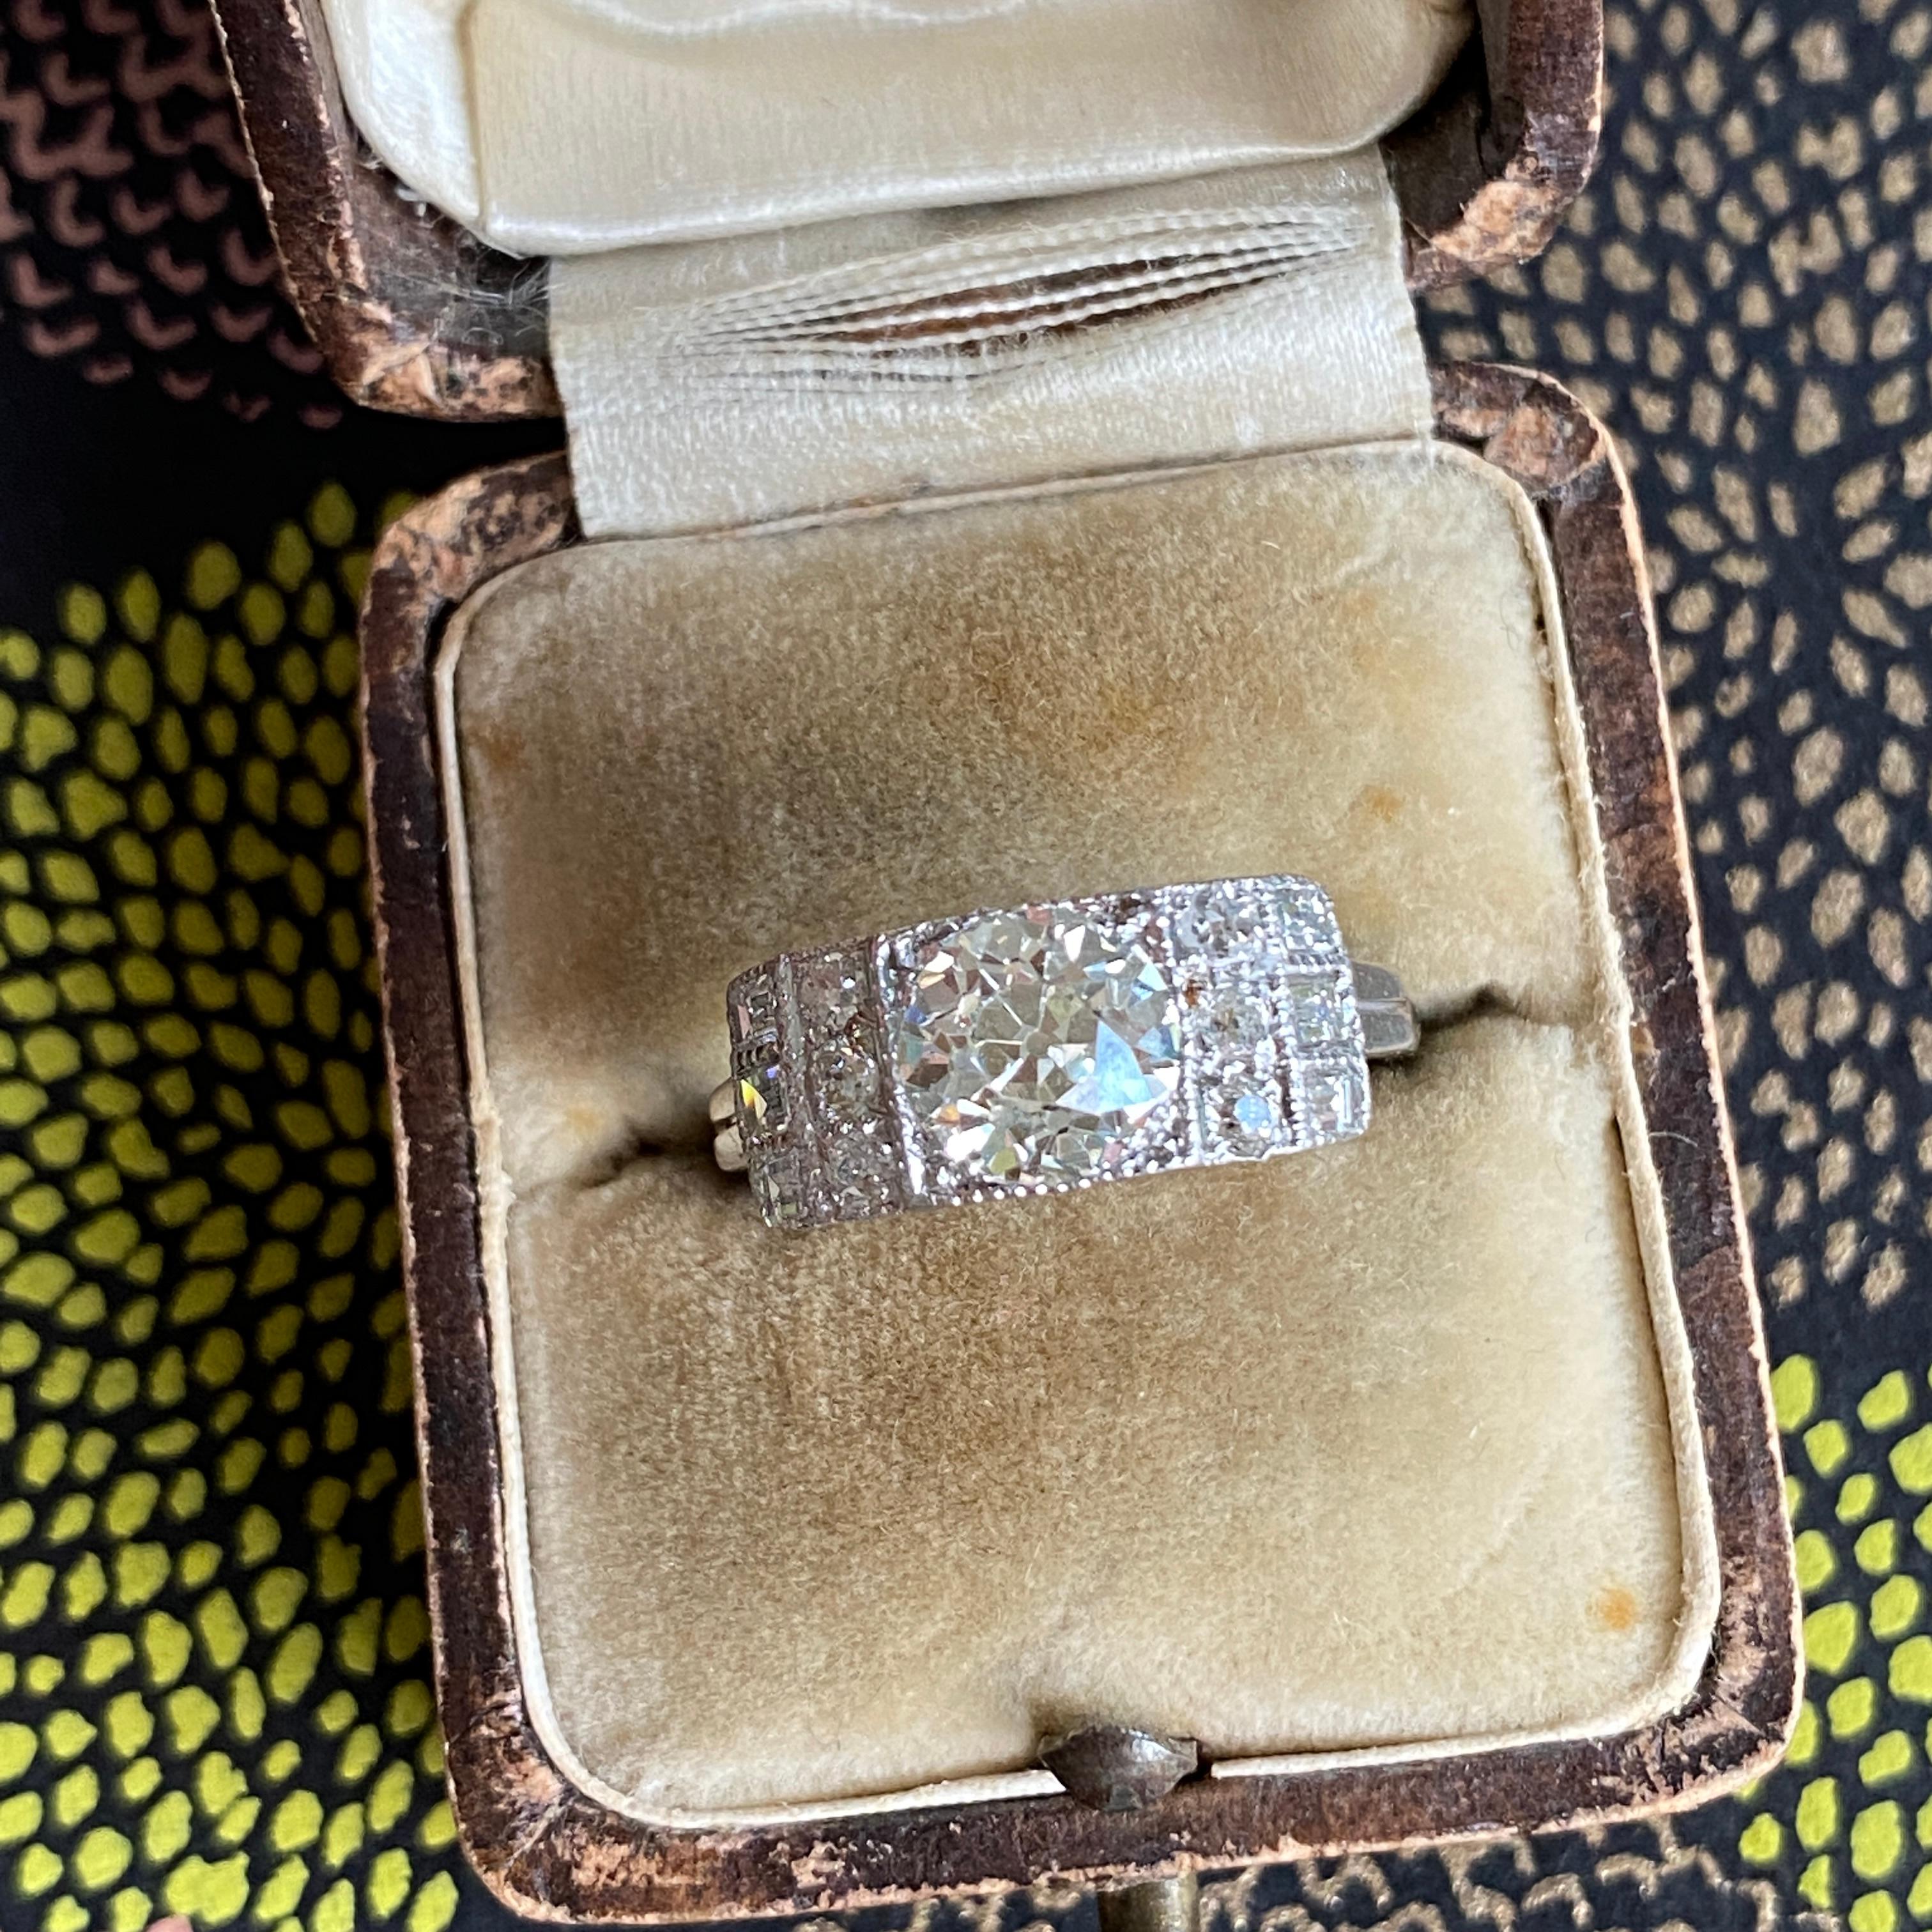 Details:
Stunning Art Deco Platinum and Old European Cut Diamond ring. Diamonds total weight is almost 2 carats—1.97 carats Total Weight! The center Old Euro cut diamond measures 7.1 x 6.9 x 4.5mm and weights approximately 1.35ct. The six smaller